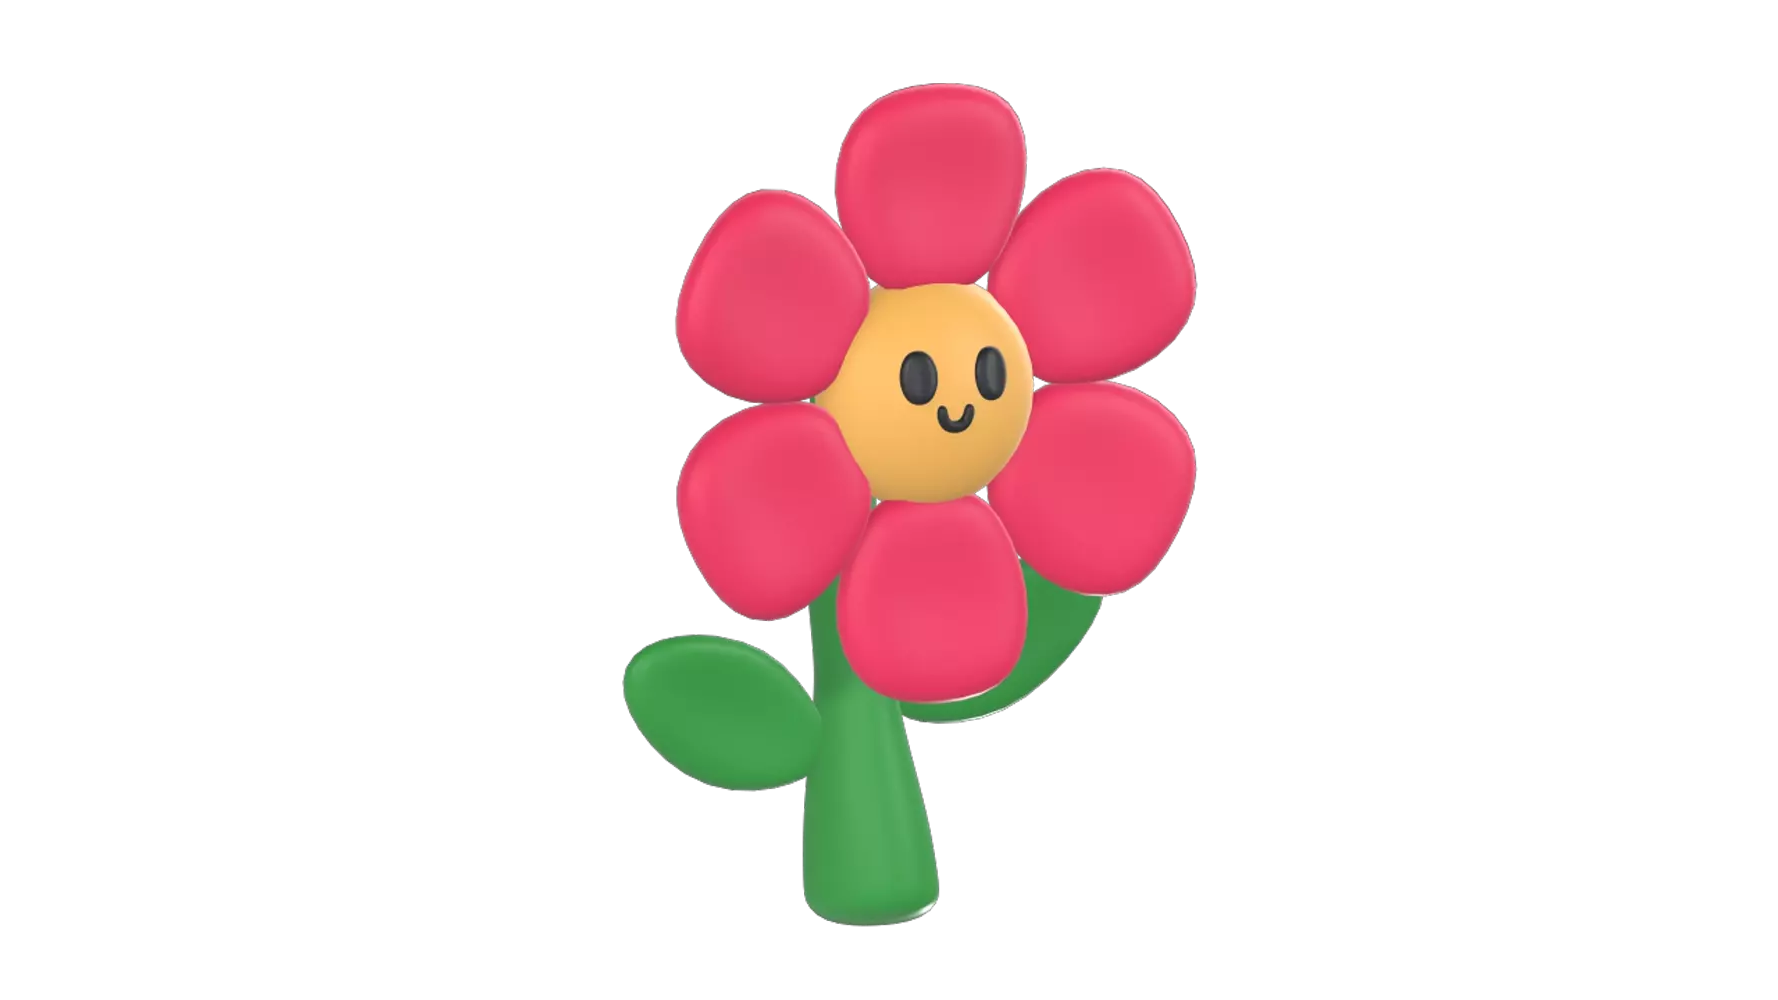 Character Flower 3D Graphic